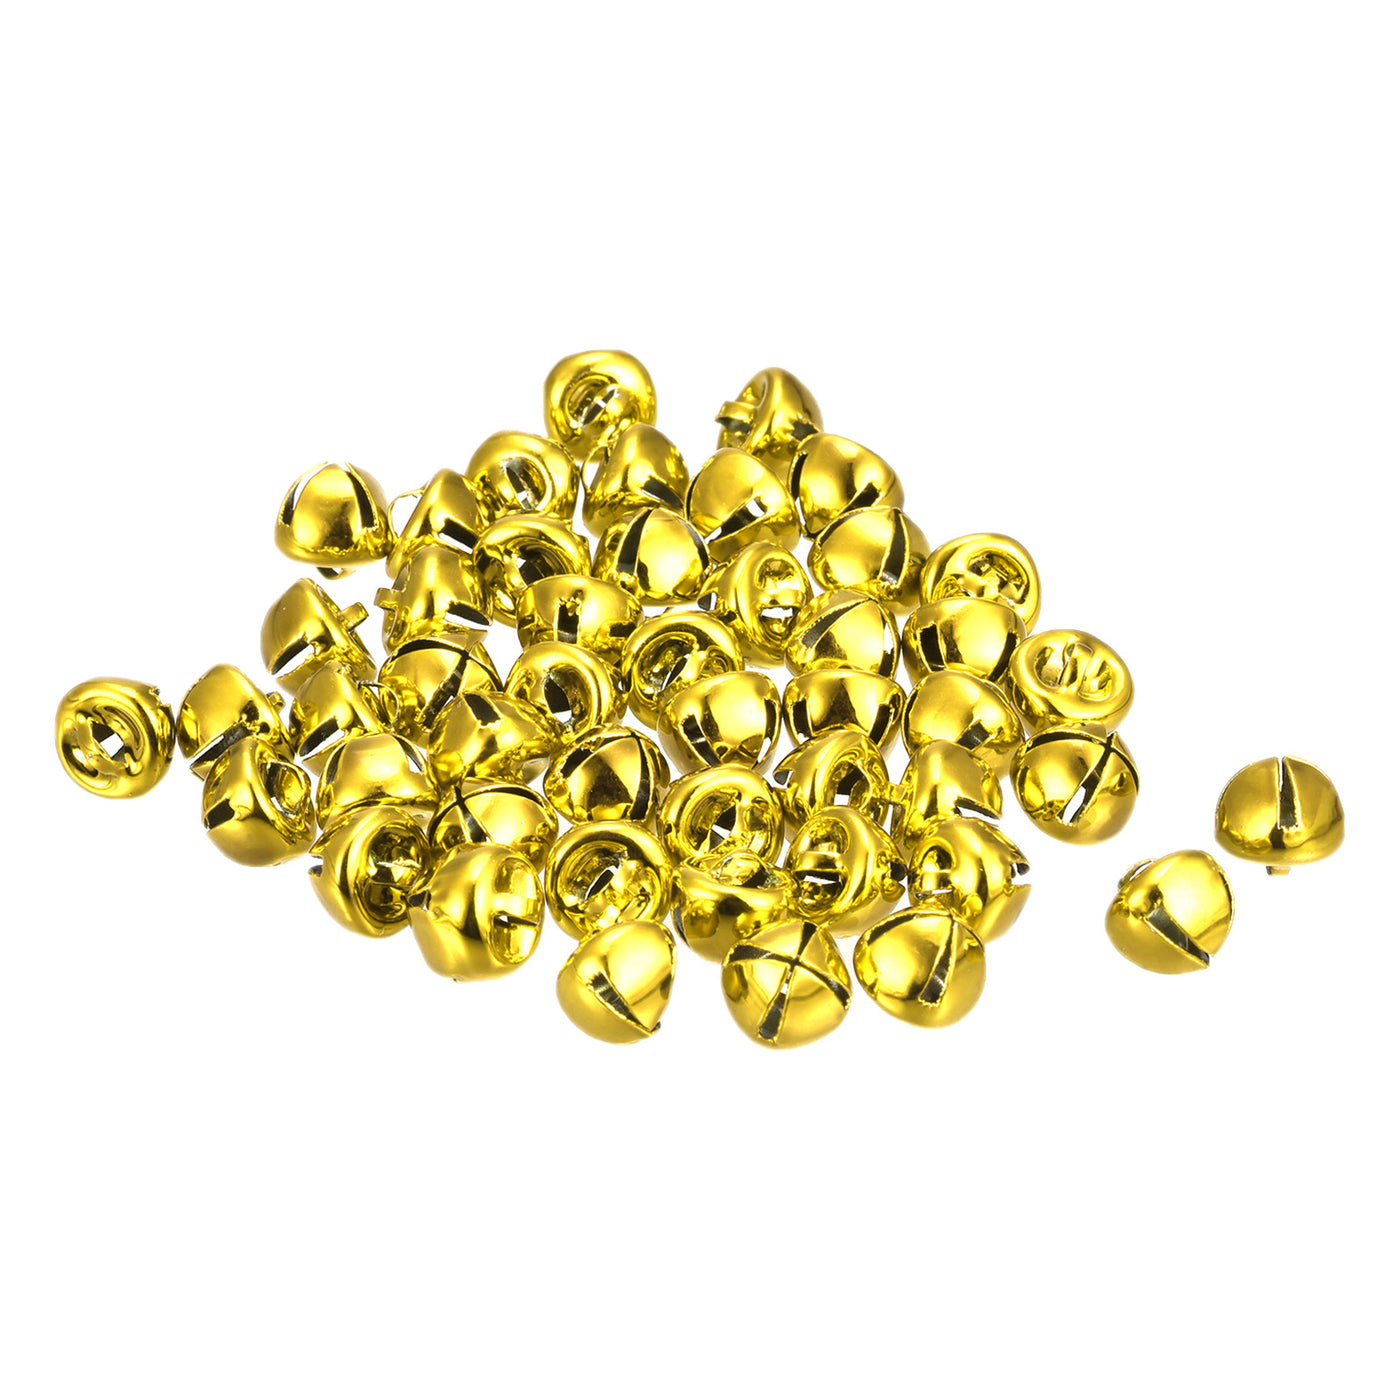 uxcell Uxcell Jingle Bells, 10mm 24pcs Small Bells for Crafts DIY Christmas, Gold Tone